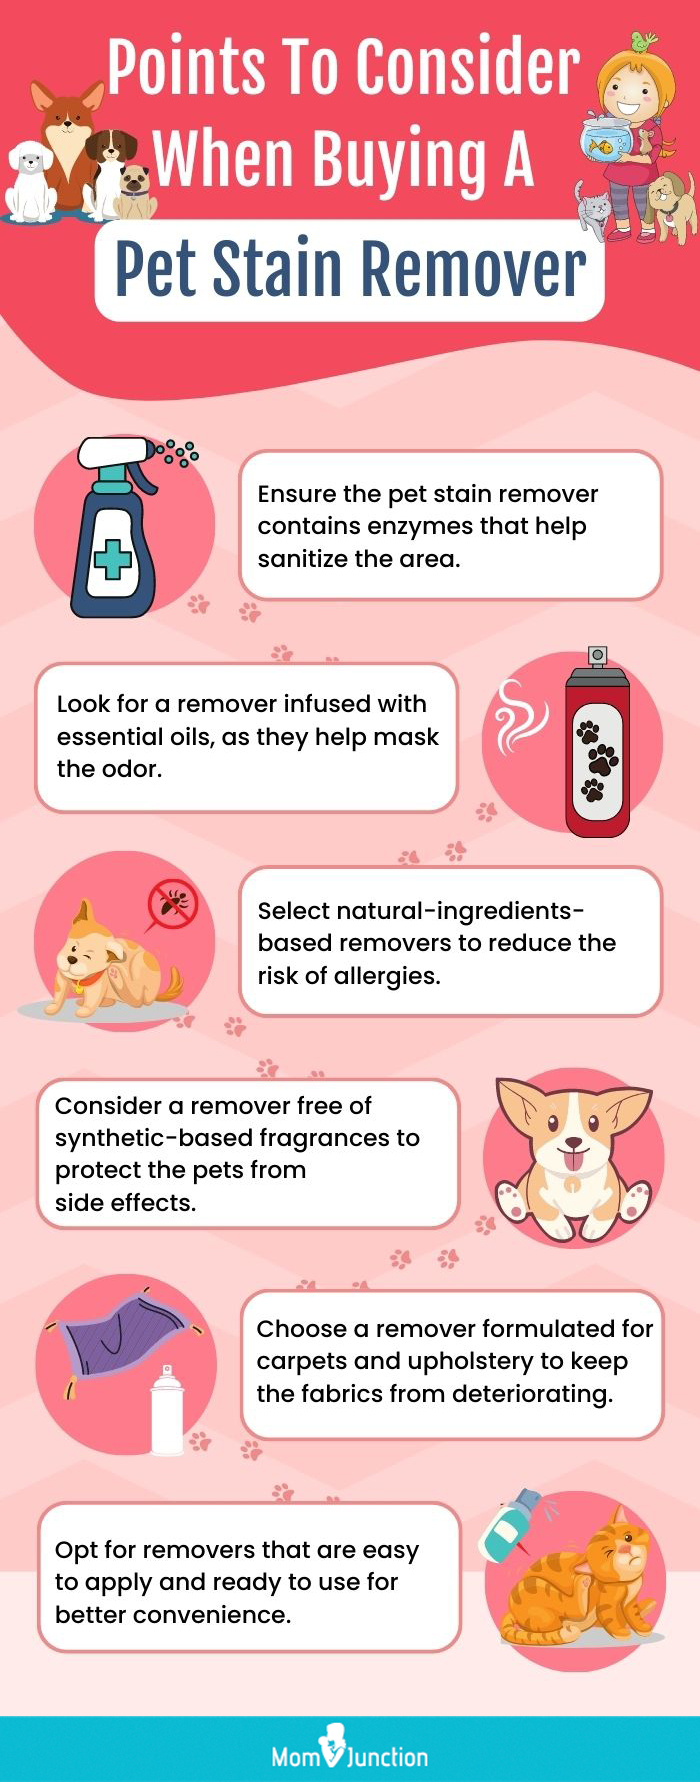 Points To Consider When Buying A Pet Stain Remover (infographic)